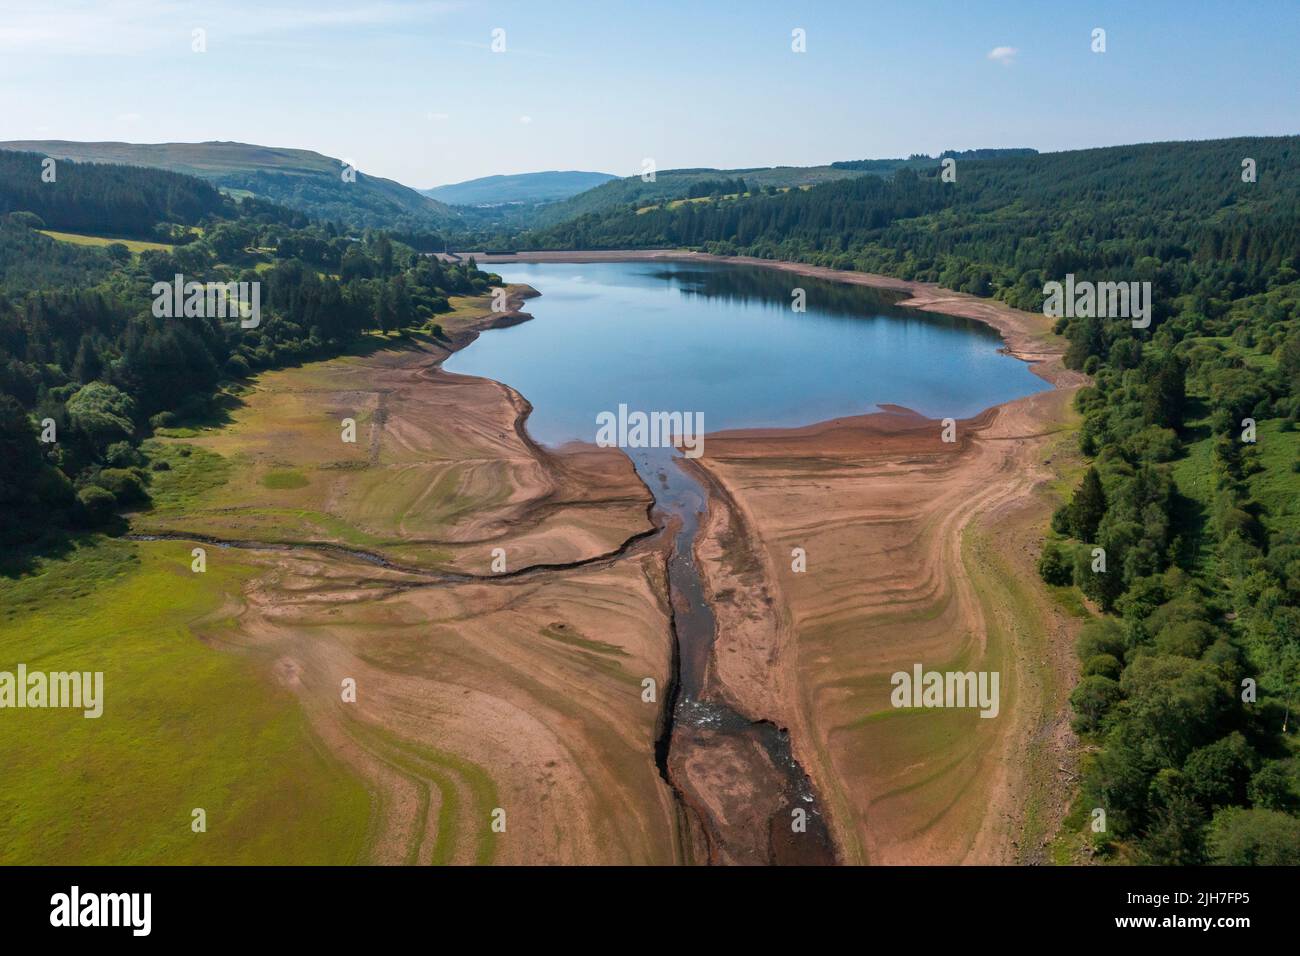 MERTHYR TYDFIL, WALES - JULY 16: An aerial view of water levels at the Llwyn-on Reservoir, the largest of the three reservoirs in the Taf Fawr valley Stock Photo